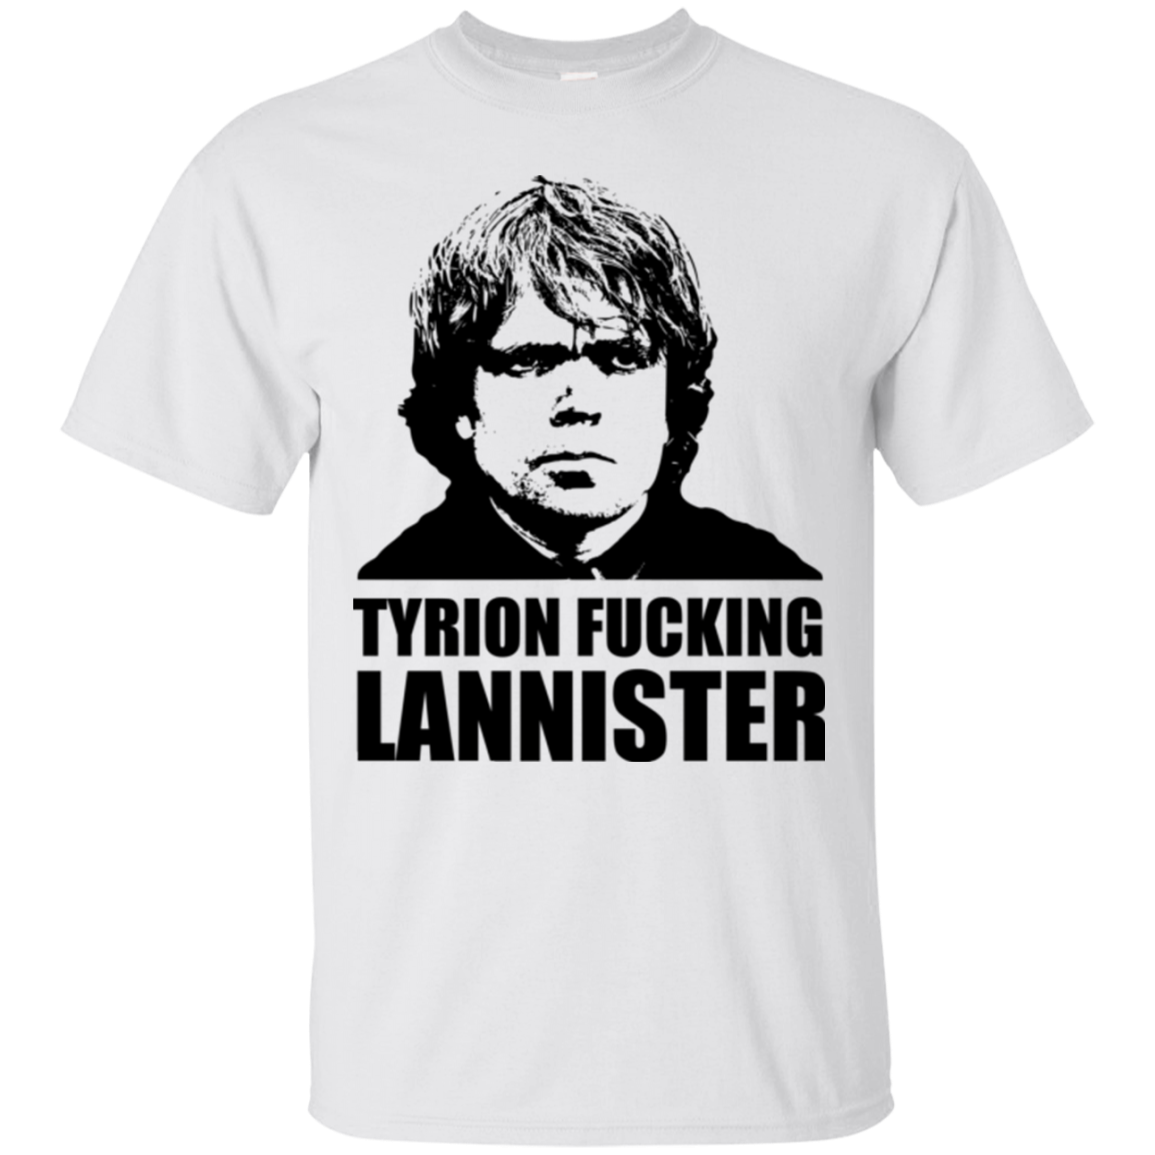 Tyrion fucking Lannister T-Shirt